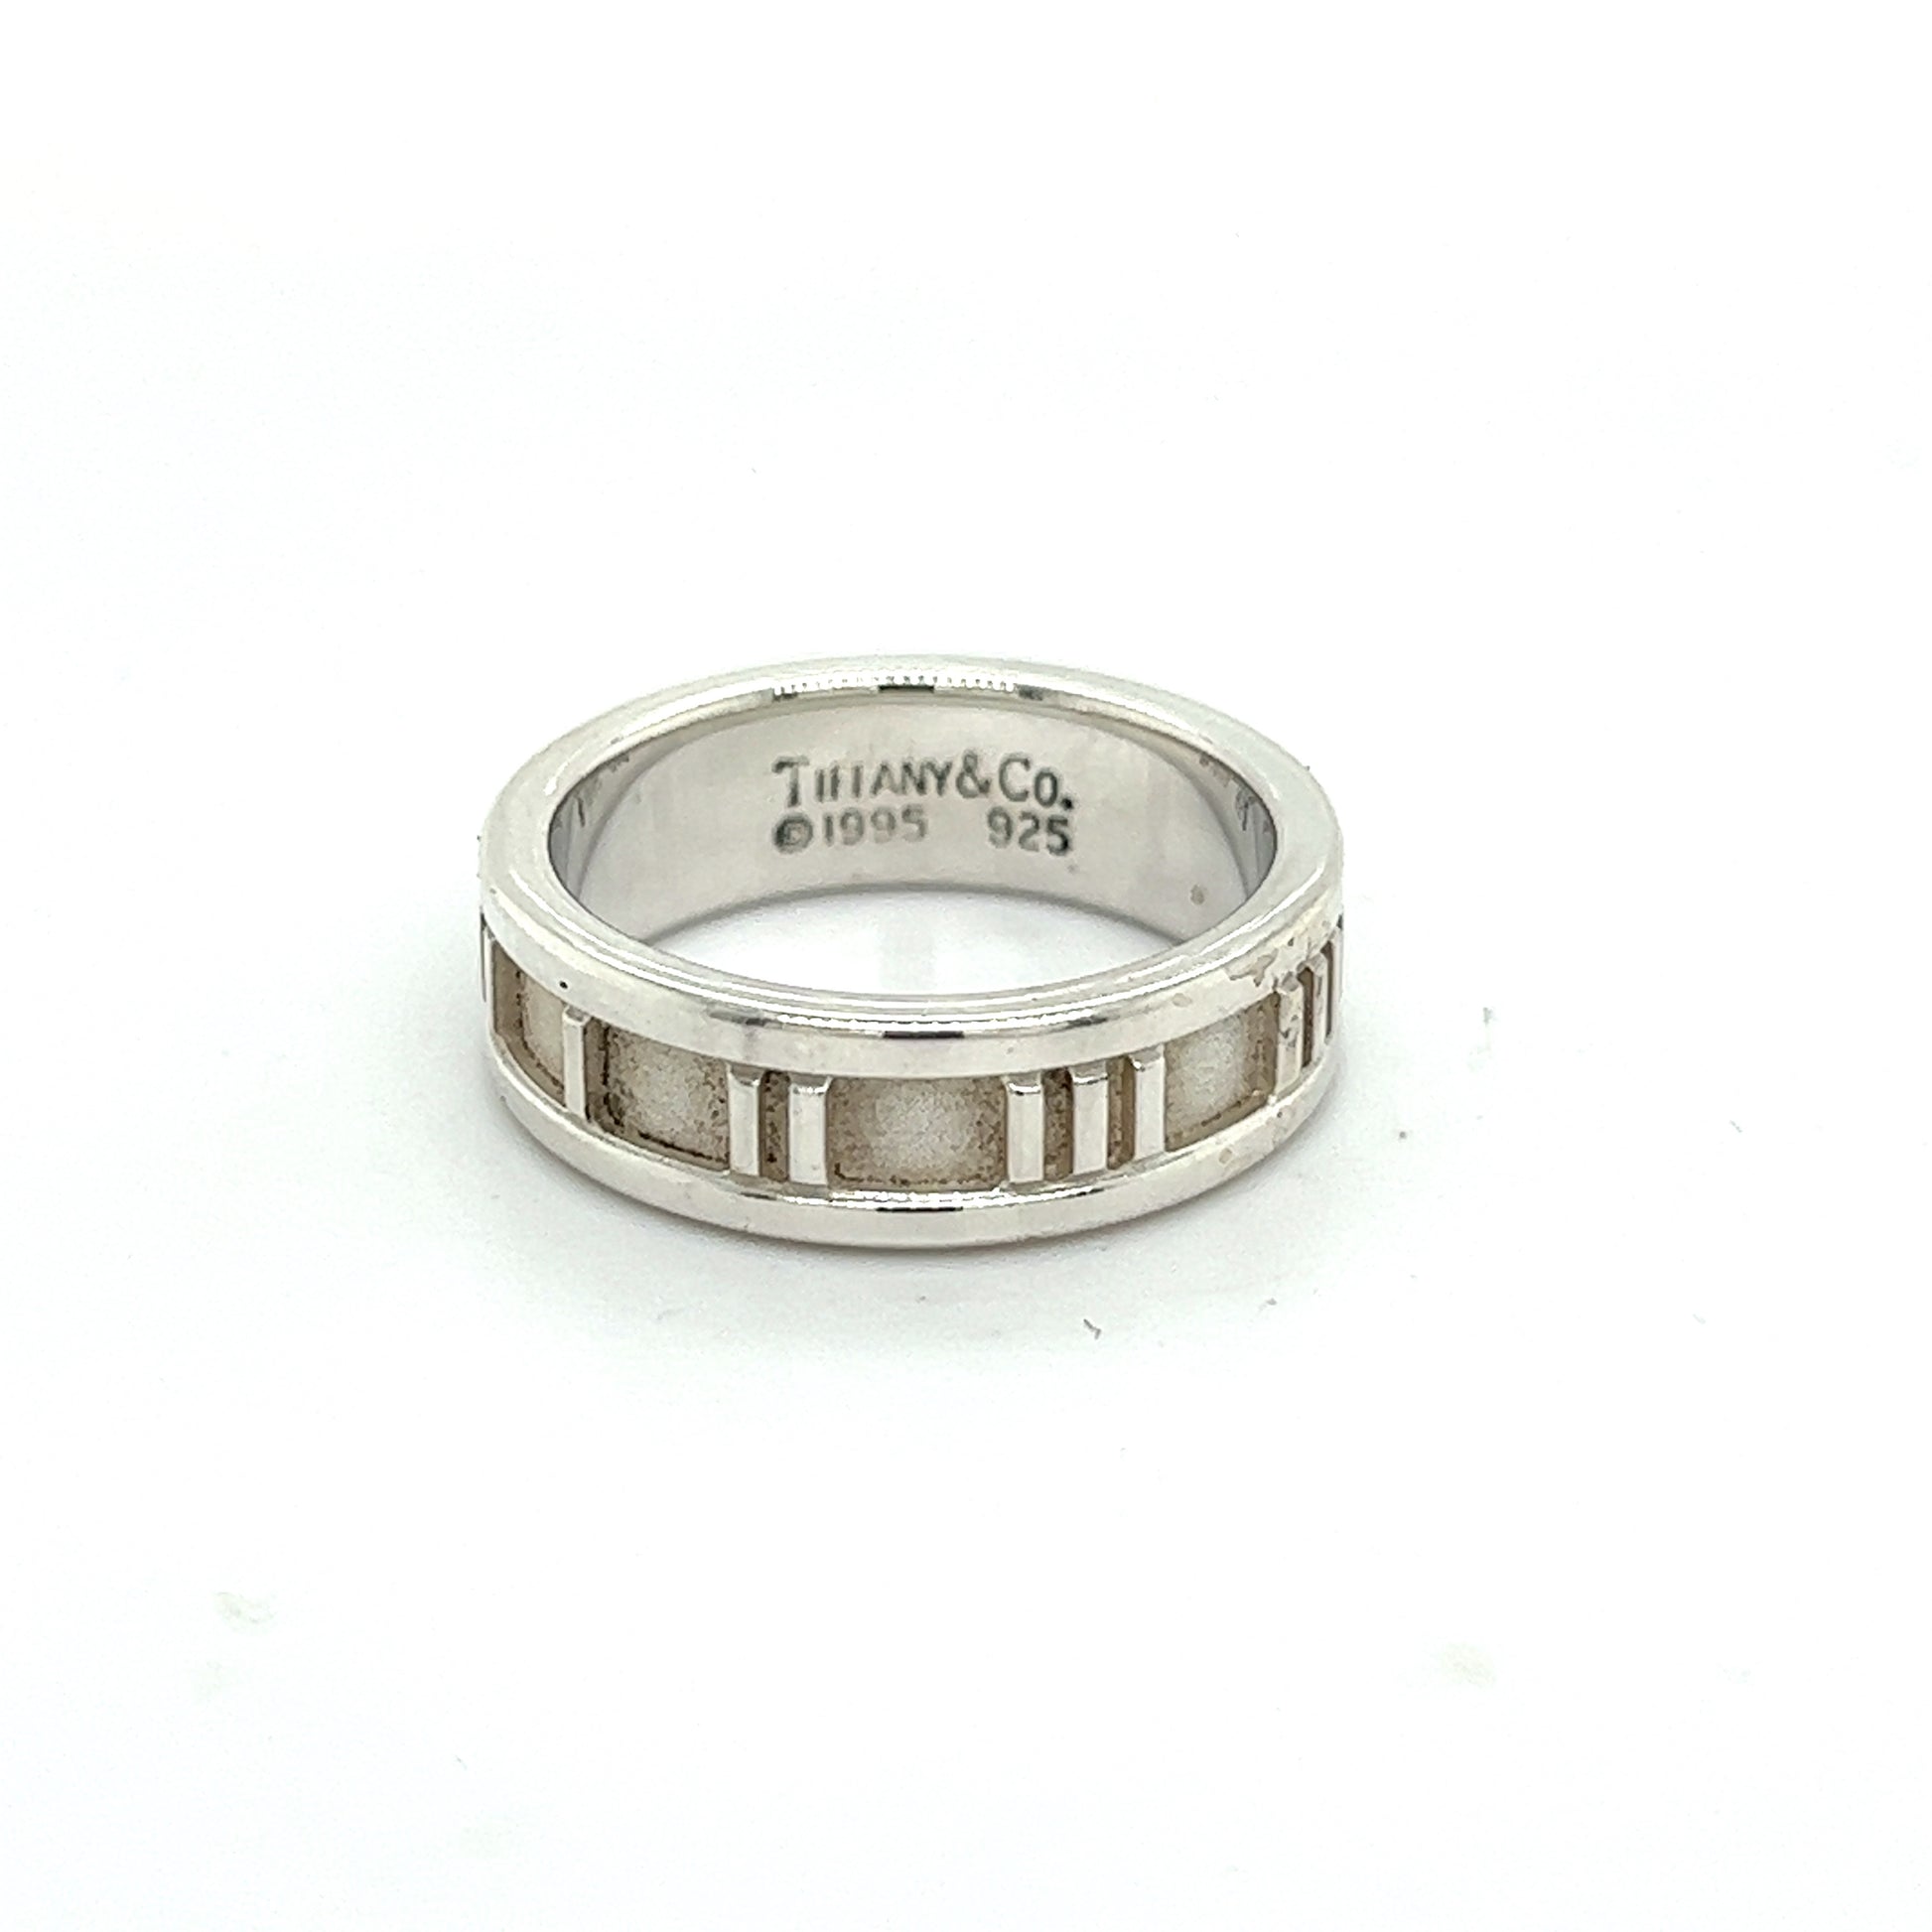 Tiffany & Co Authentic Estate Atlas Ring Size 6.5 Silver 6 mm TIF379